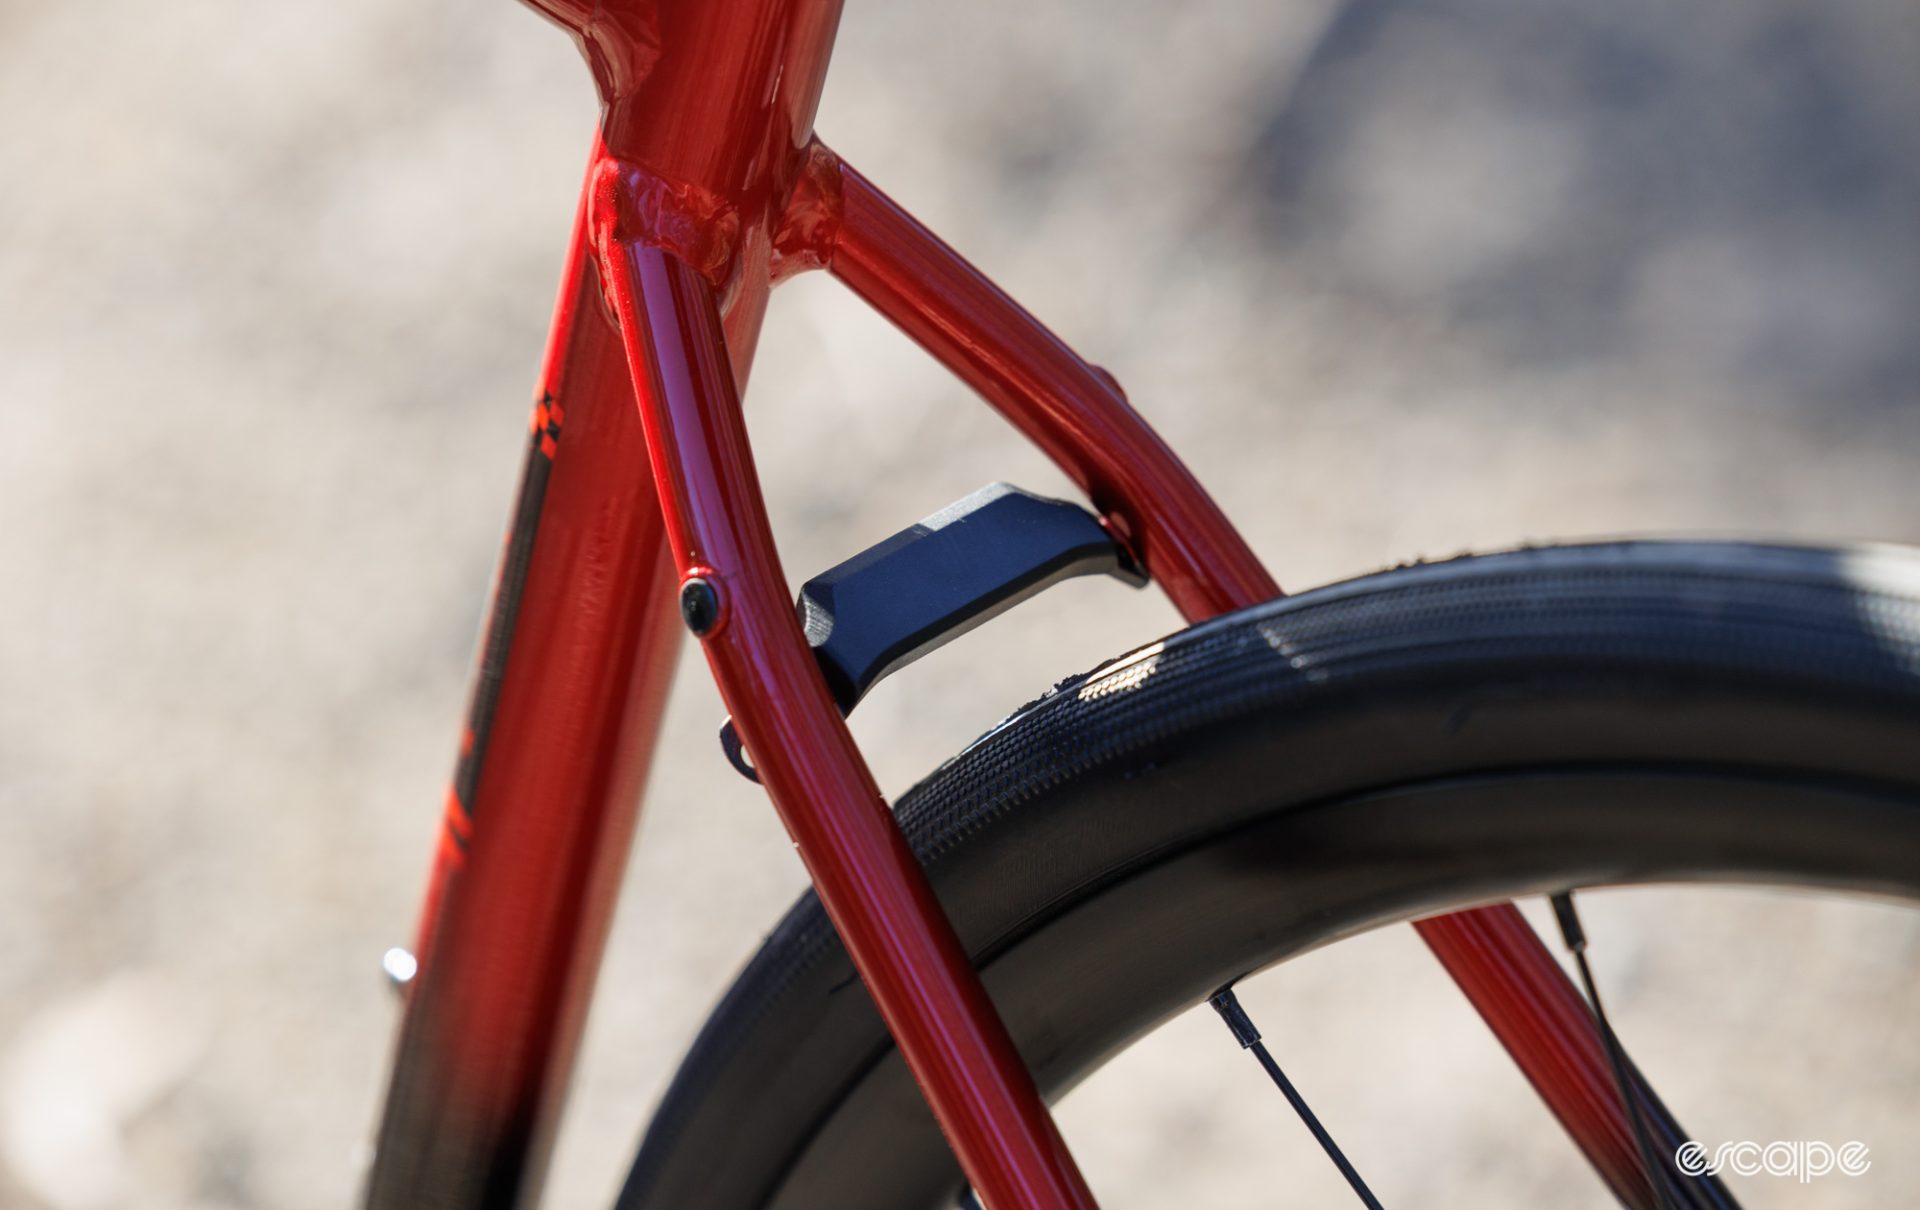 A close-up photo showing the plastic seatstay bridge used for mounting a fender. 